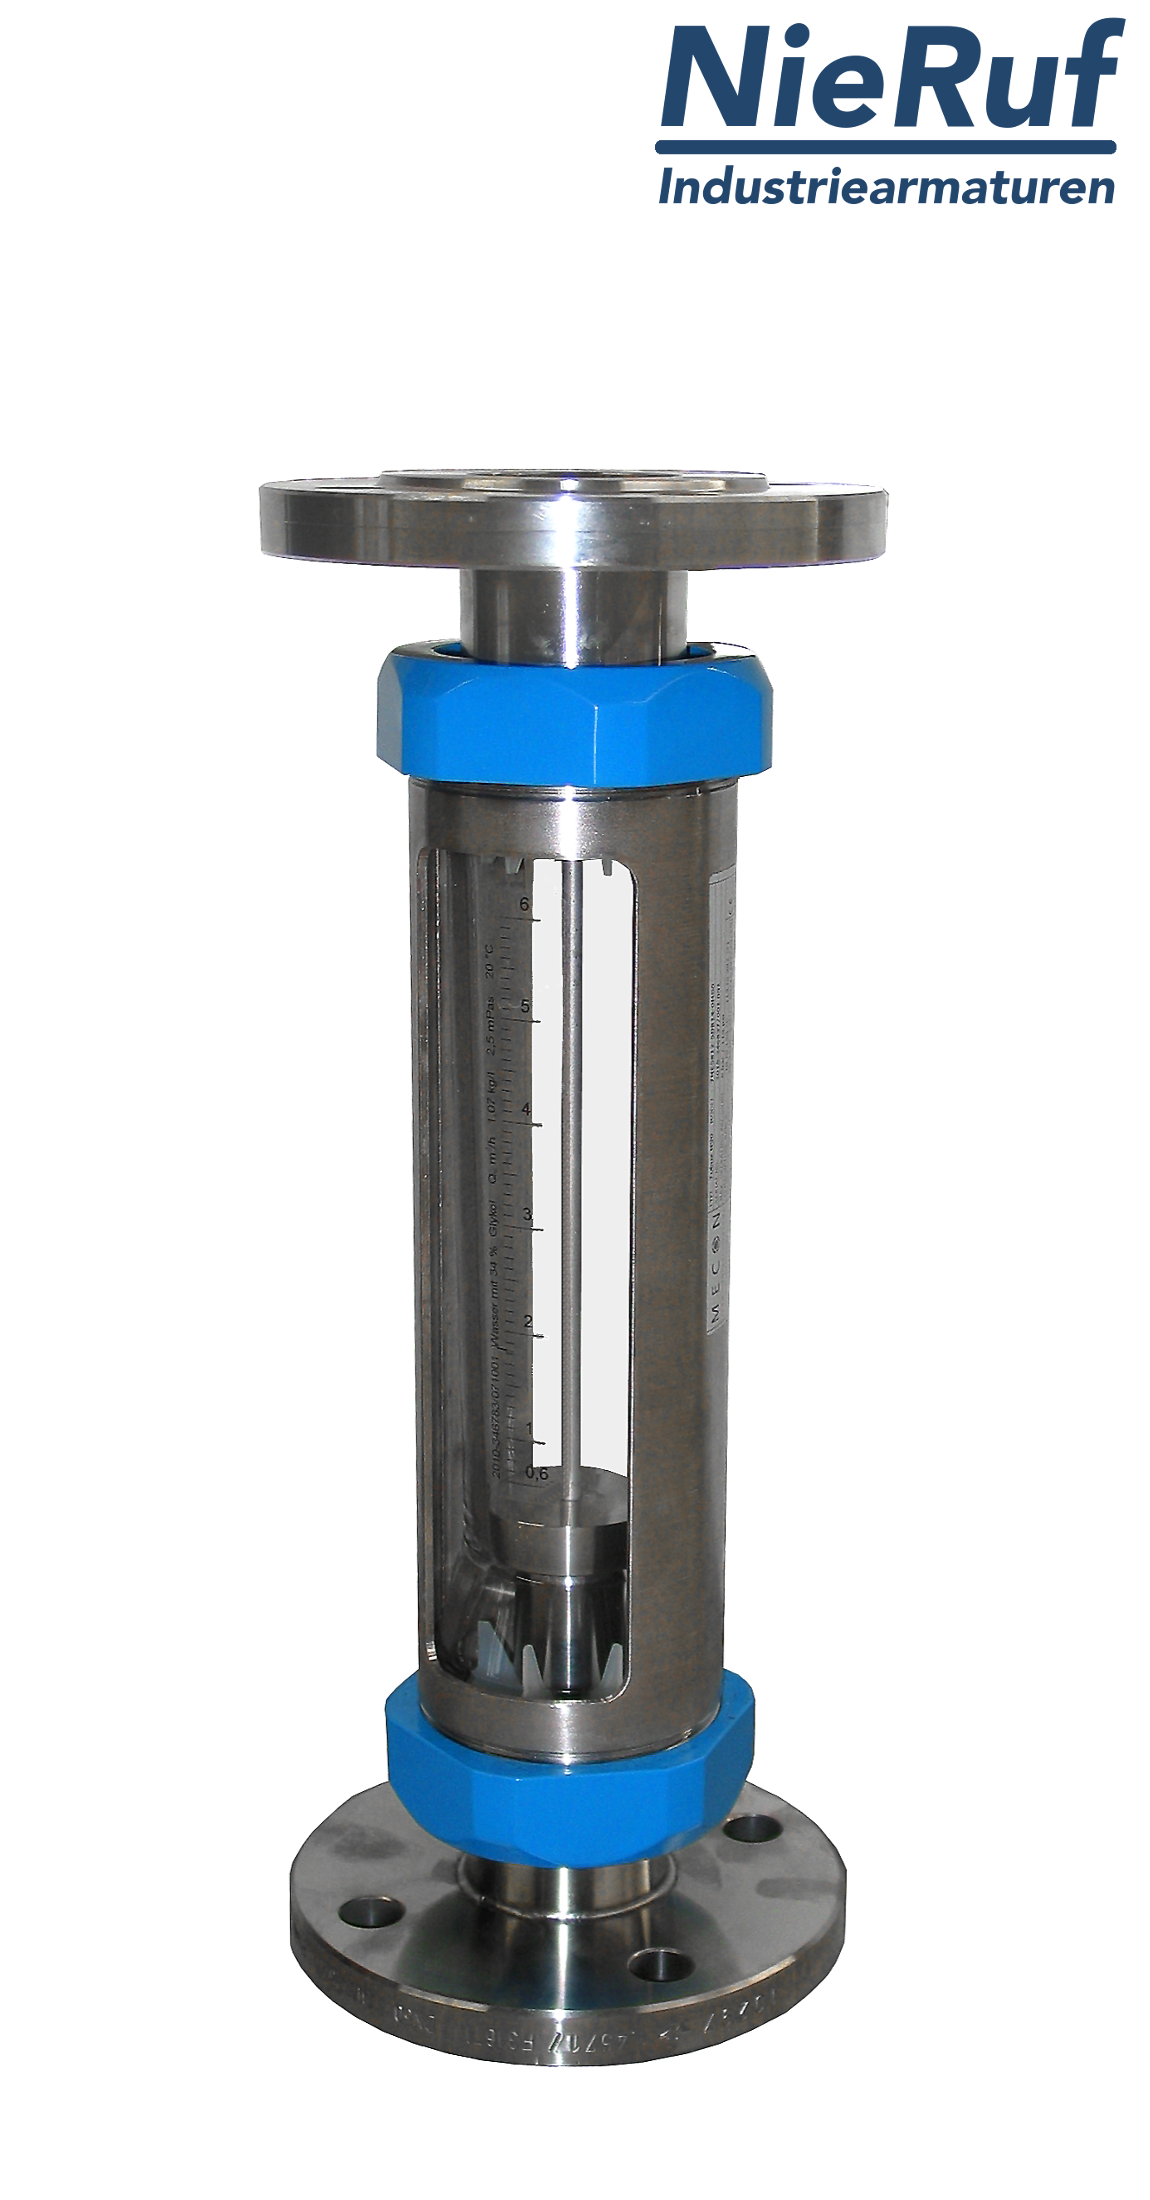 Variable area flowmeter stainless steel + borosilicate flange DN15 8.0 - 80.0 l/h water FKM